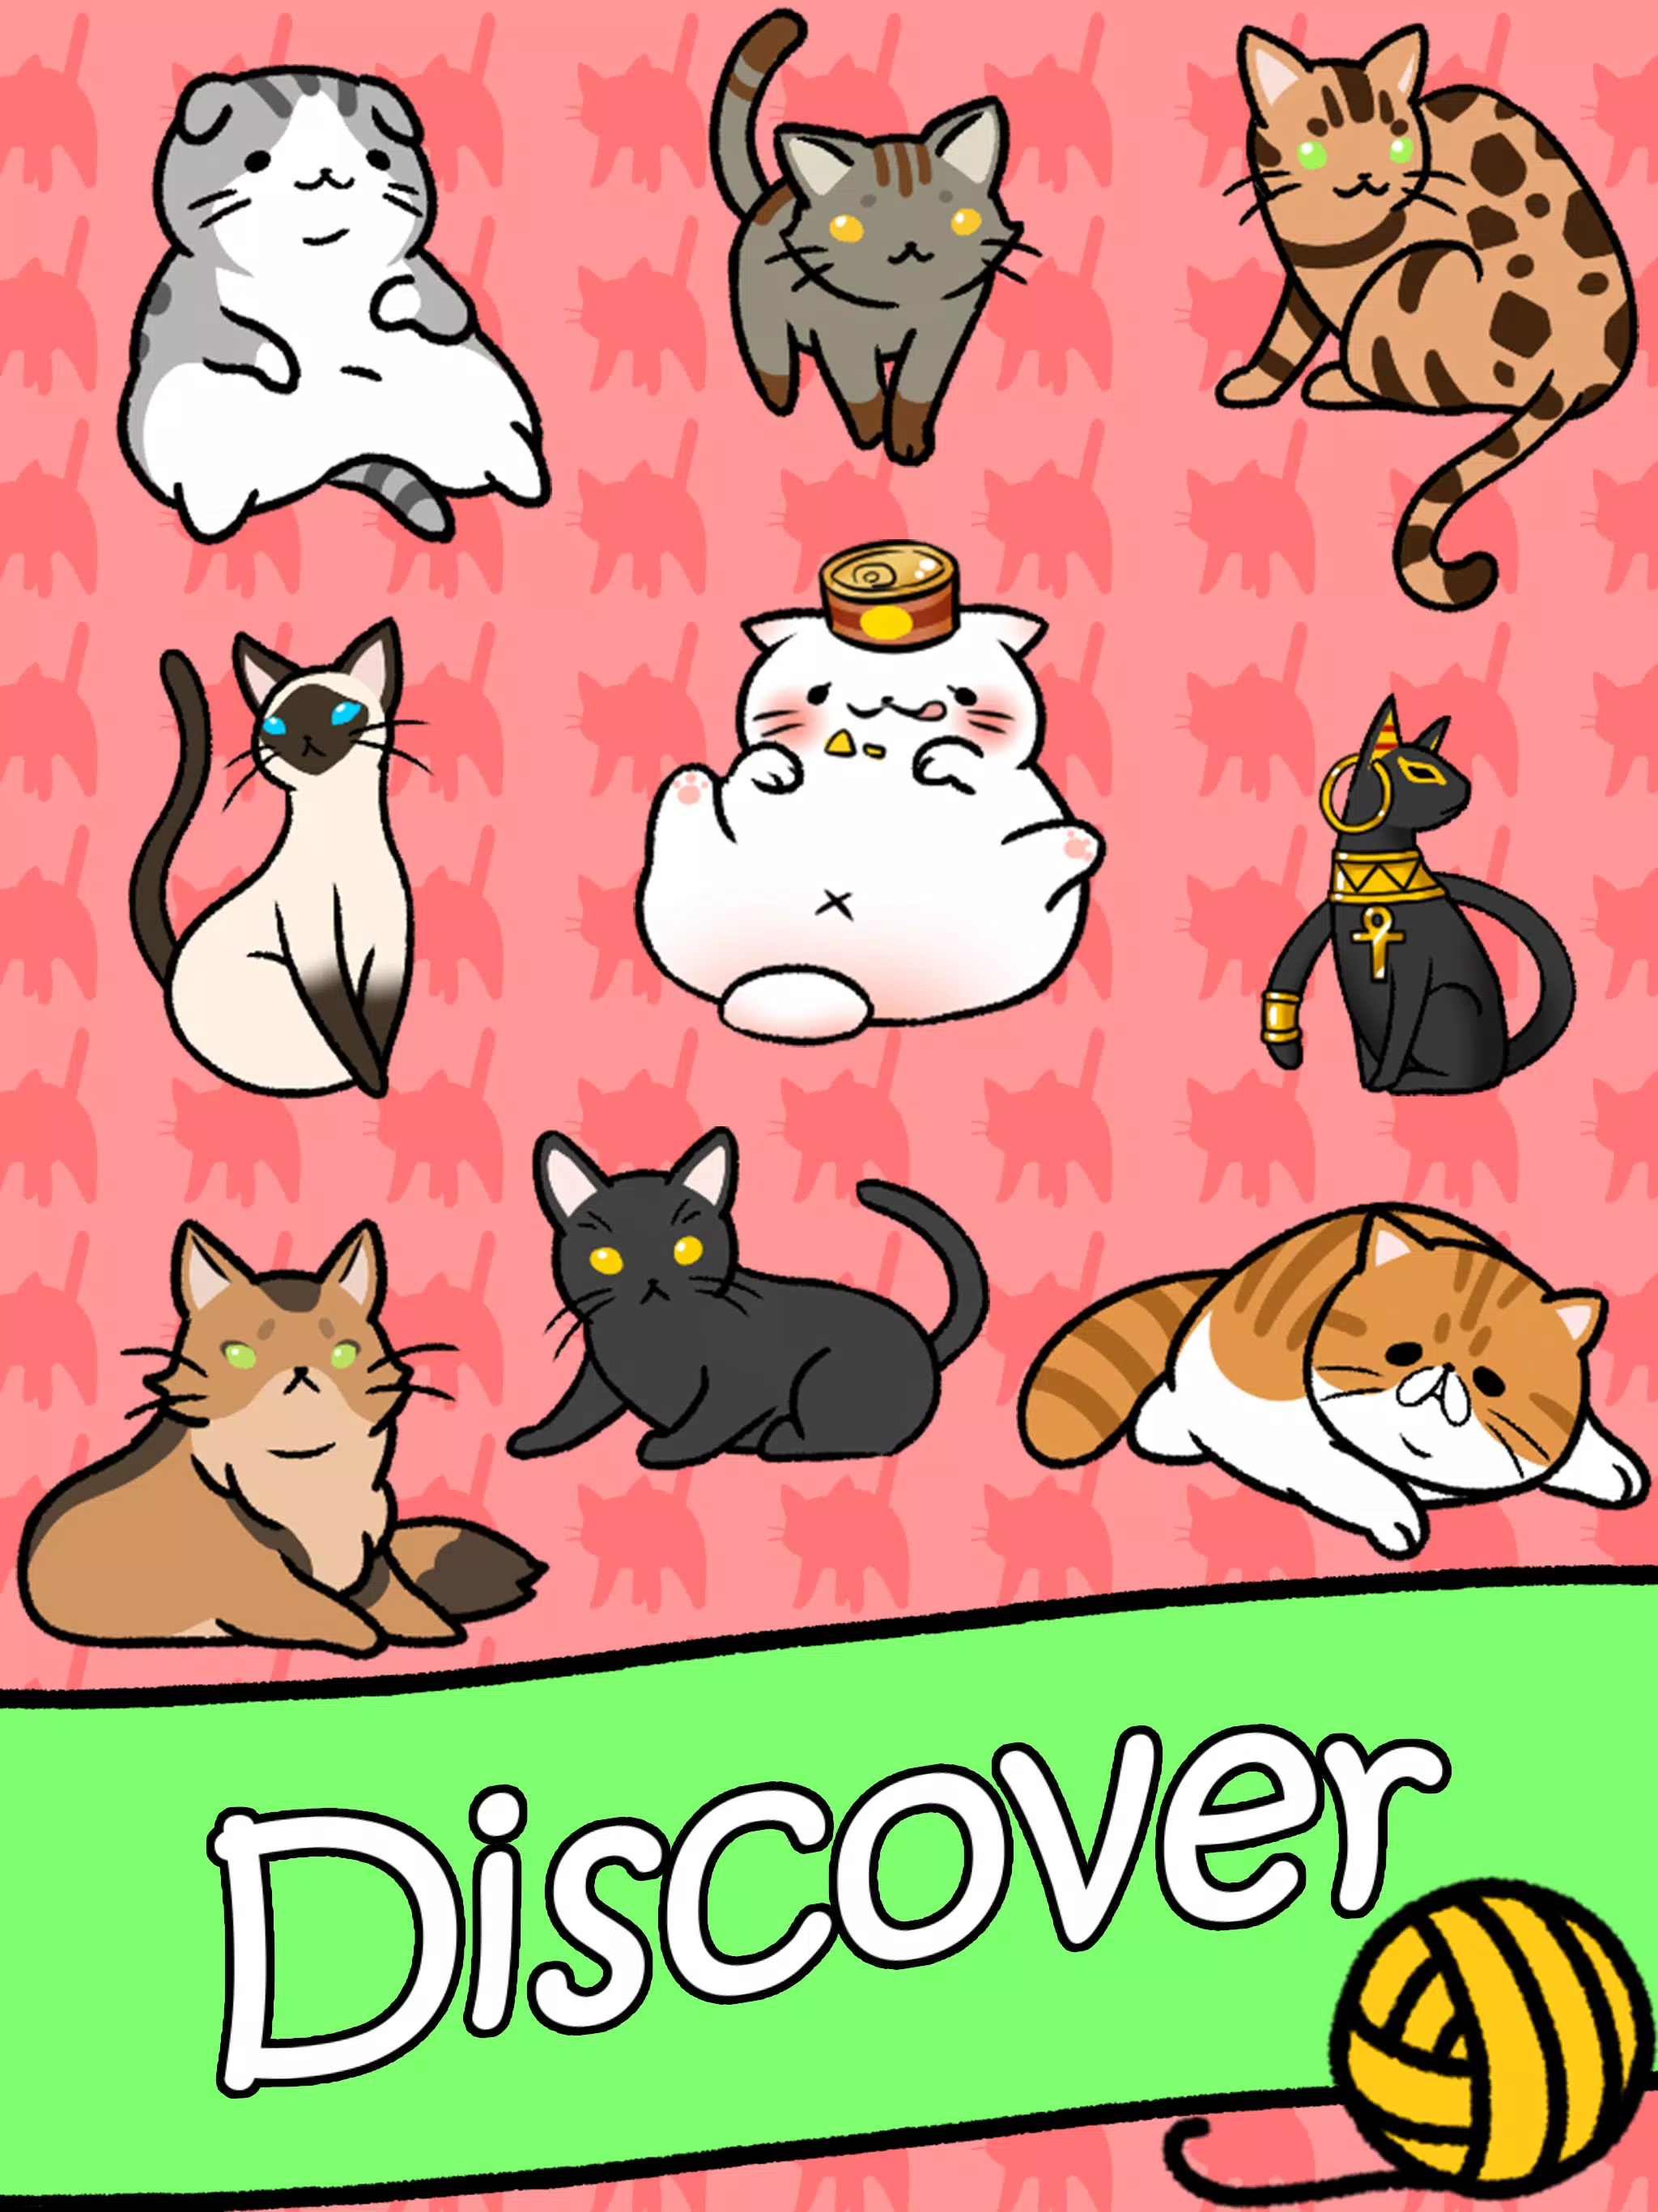 Cat Condo blends cute cats with an addictive idle clicker game - The Verge